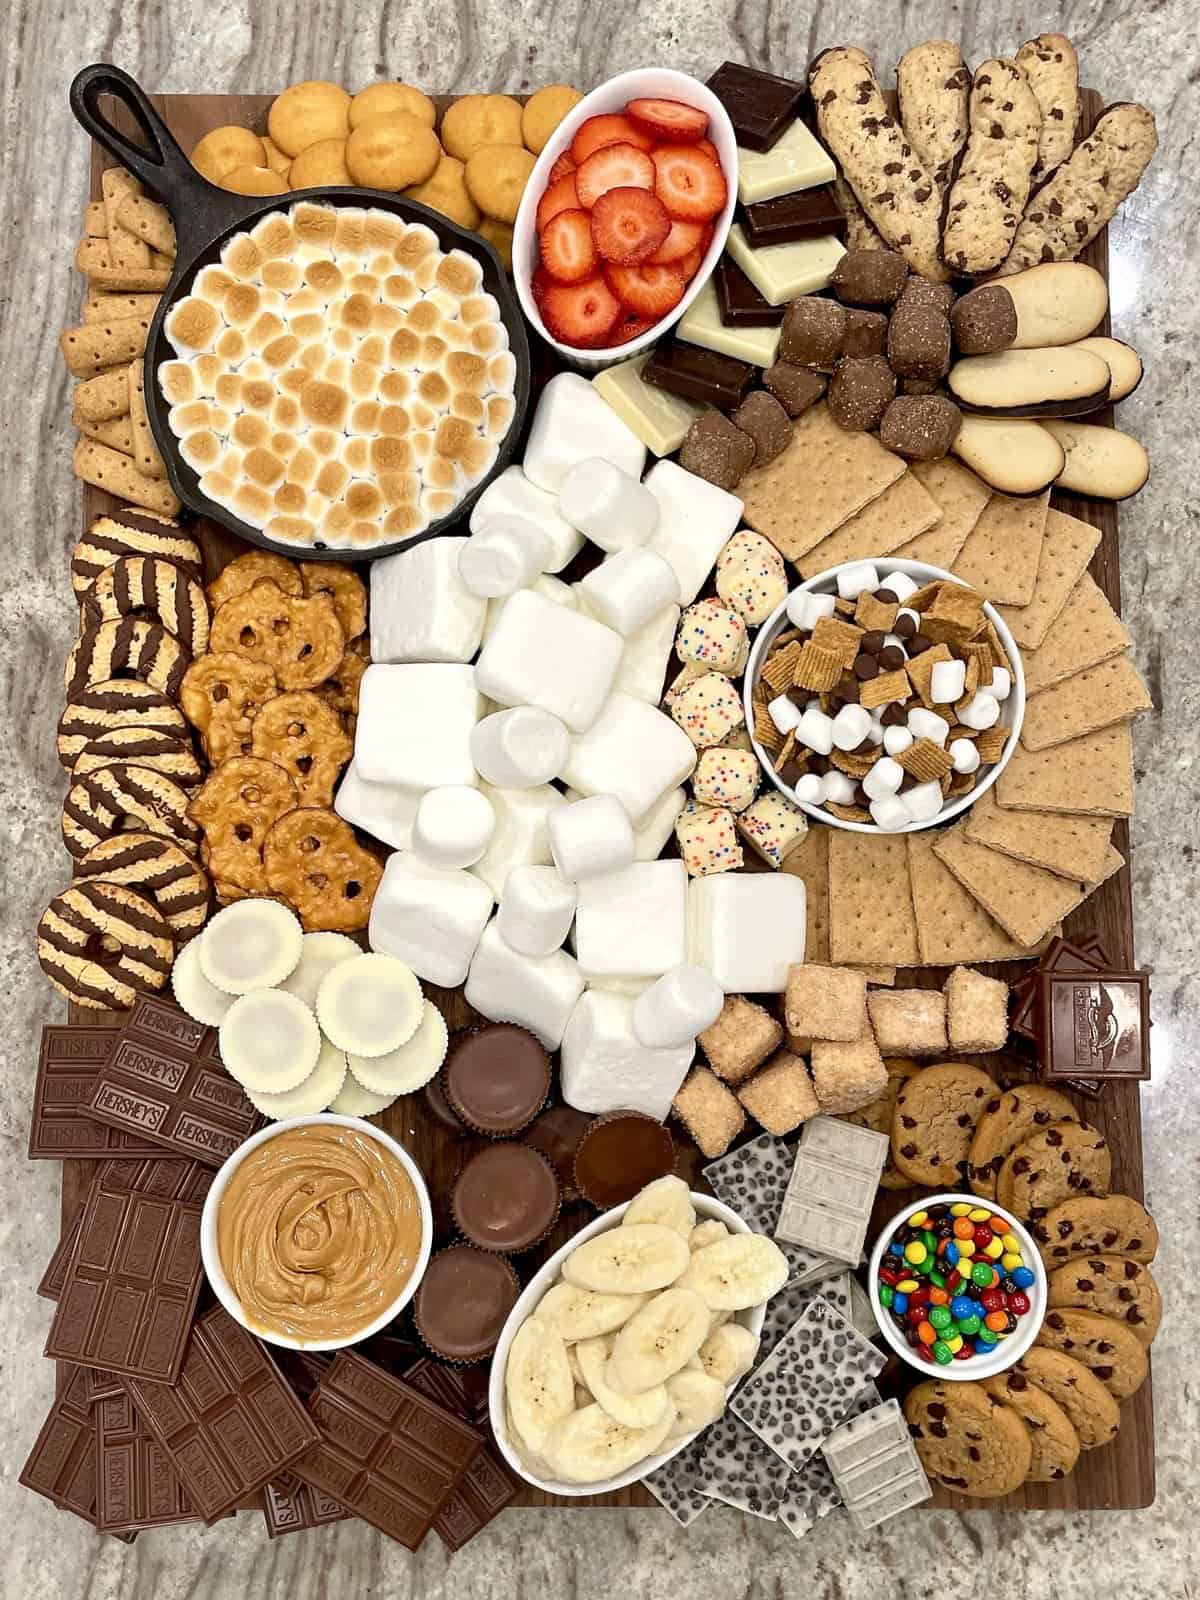 A large wooden board with graham crackers, marshmallows, Fudge Stripe cookies, S'mores skillet dip, sliced strawberries and bananas, pretzel chips, and chocolate chip cookies.